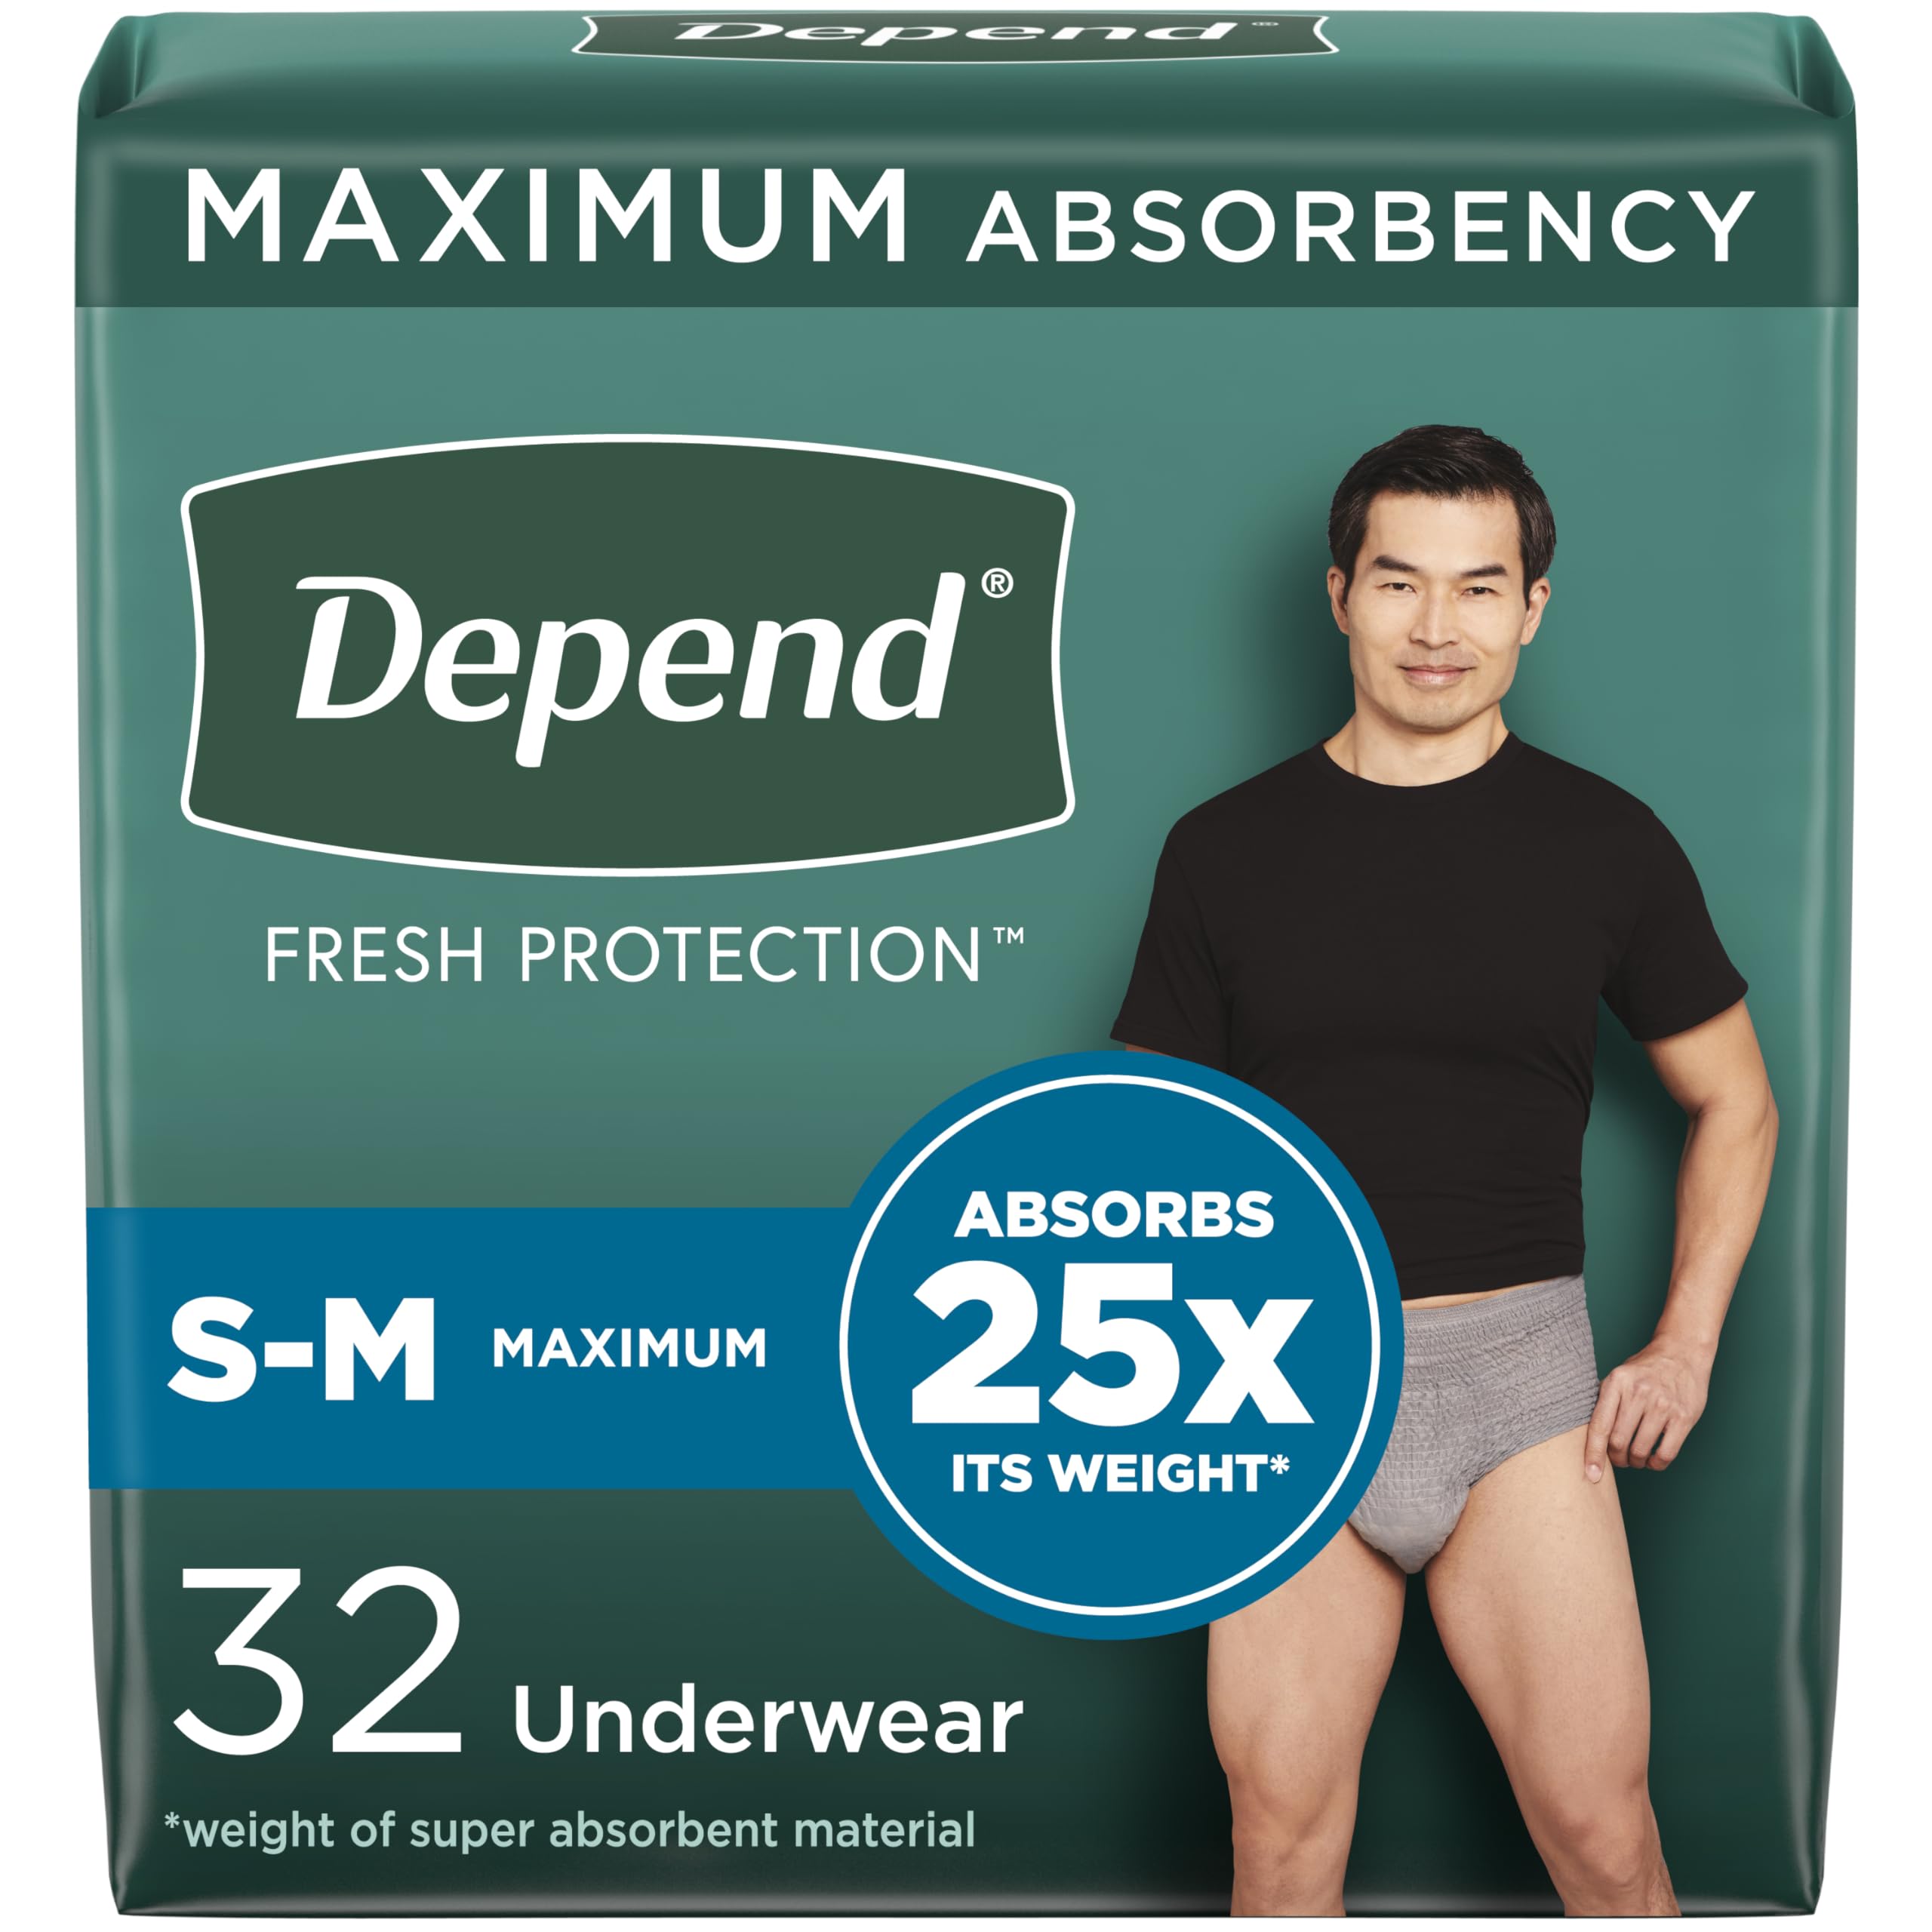 Depend Fresh Protection Adult Incontinence Underwear for Men (Formerly Depend Fit-Flex), Disposable, Maximum, Small/Medium, Grey, 32 Count, Packaging May Vary